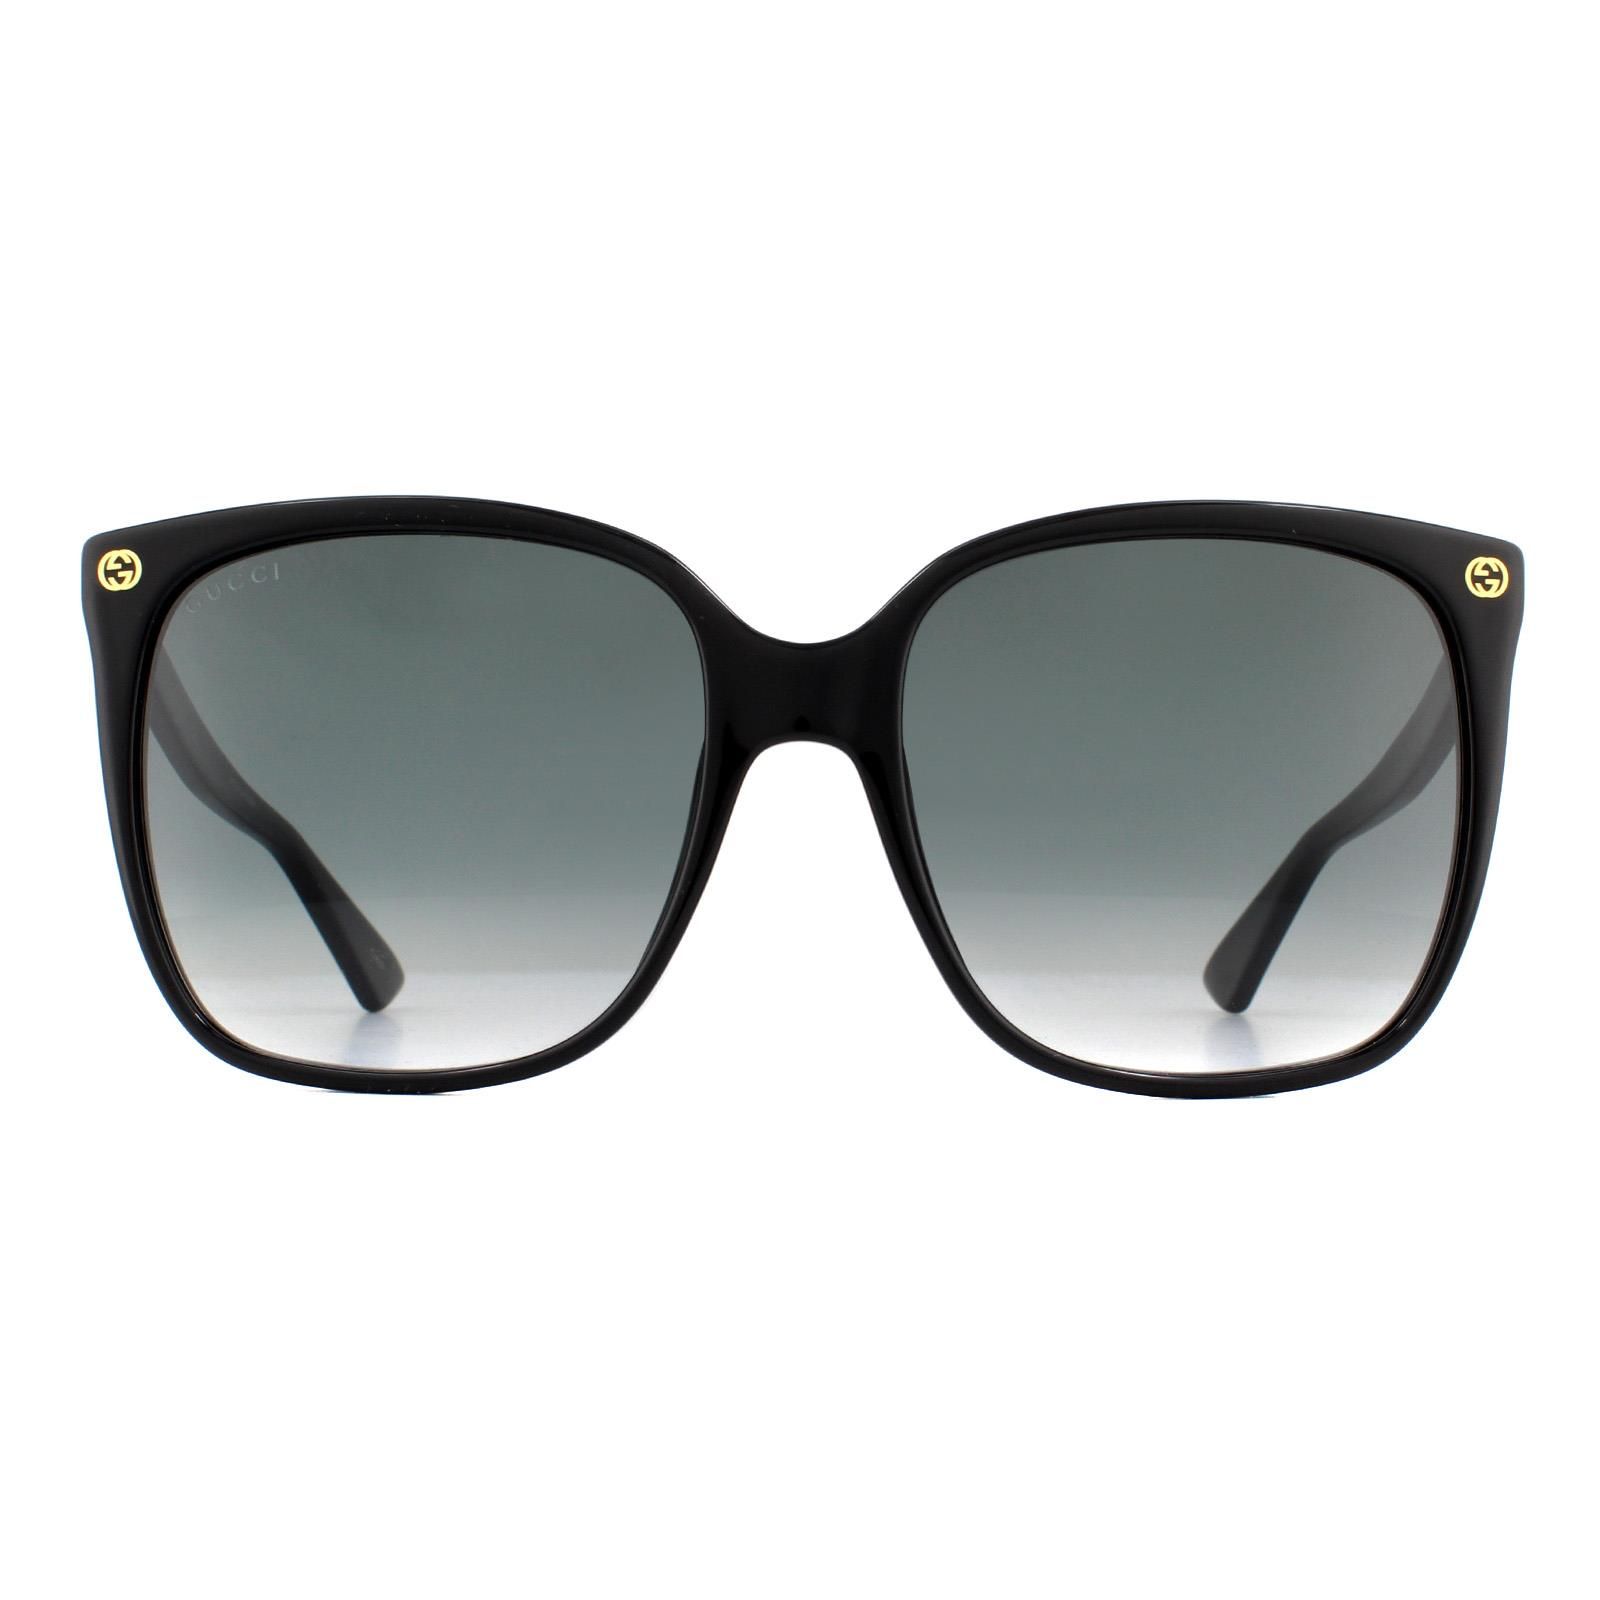 Gucci Sunglasses GG0022S 001 Black Grey Gradient have a simple squared off shape with the stylish GG logos at the front temples and a bee detail on the temple tip.